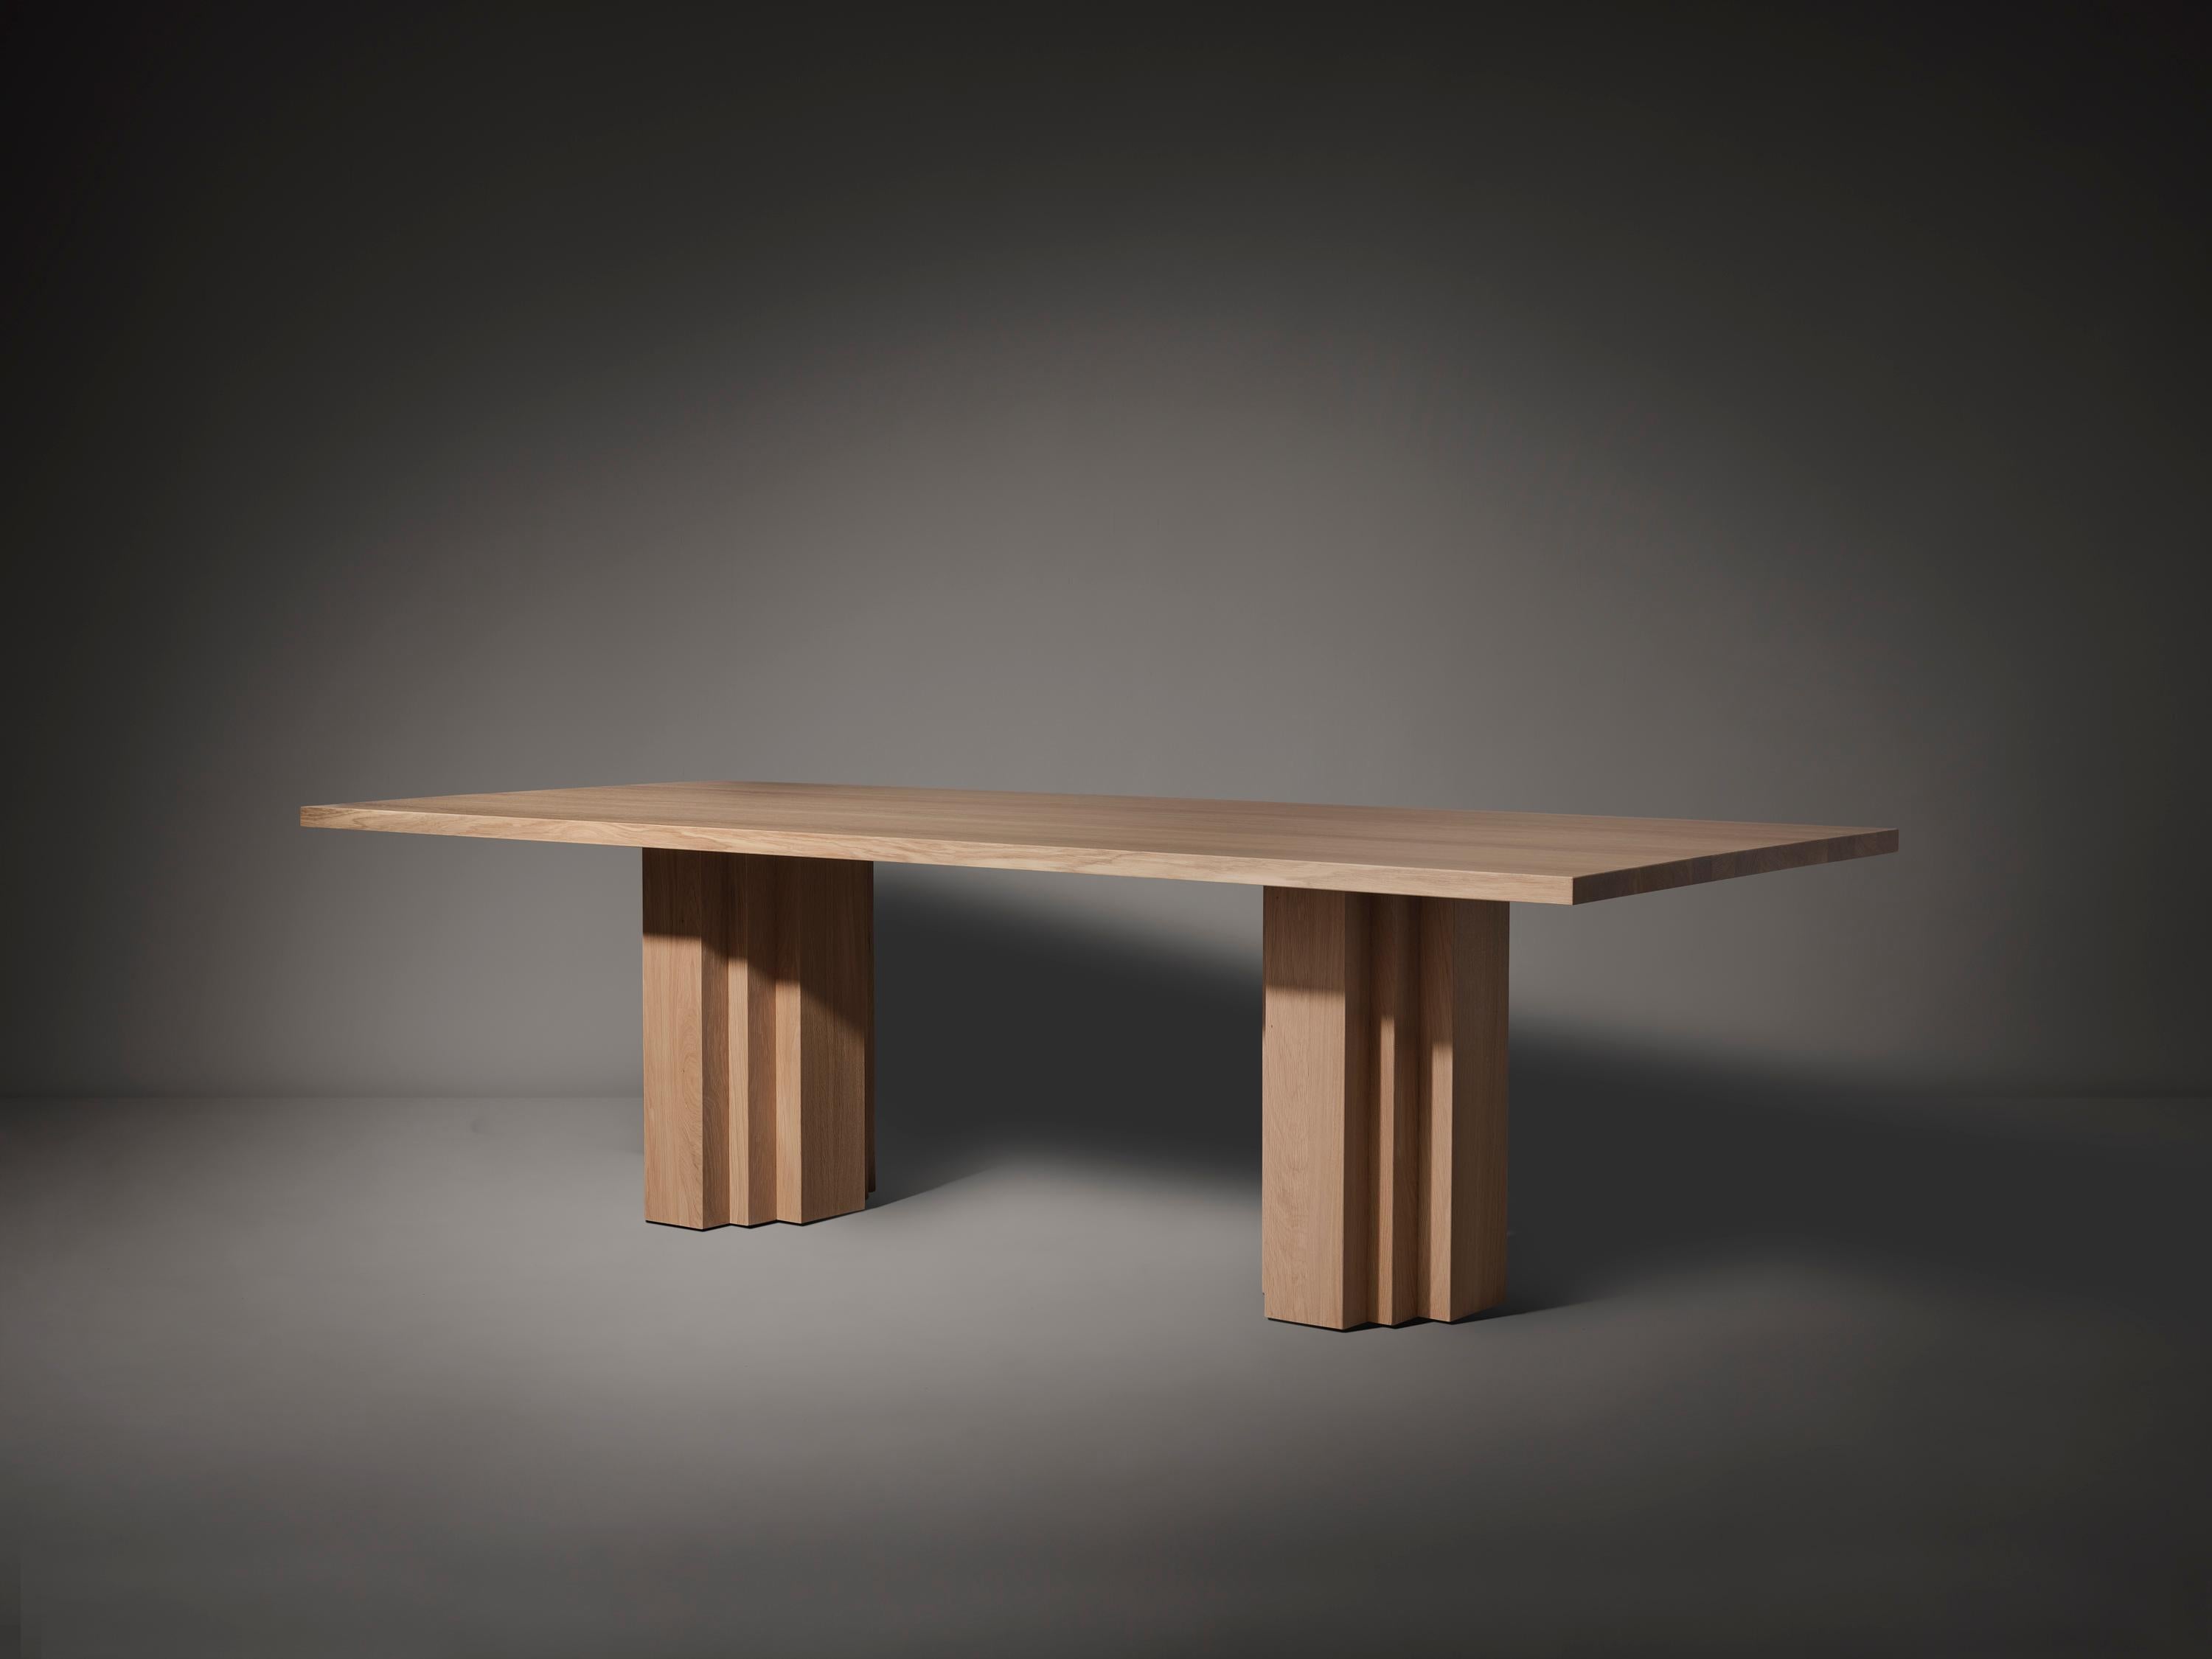 Sculptural Solid Oak Wooden Brut Dining Table - Black In New Condition For Sale In Amsterdam, NL